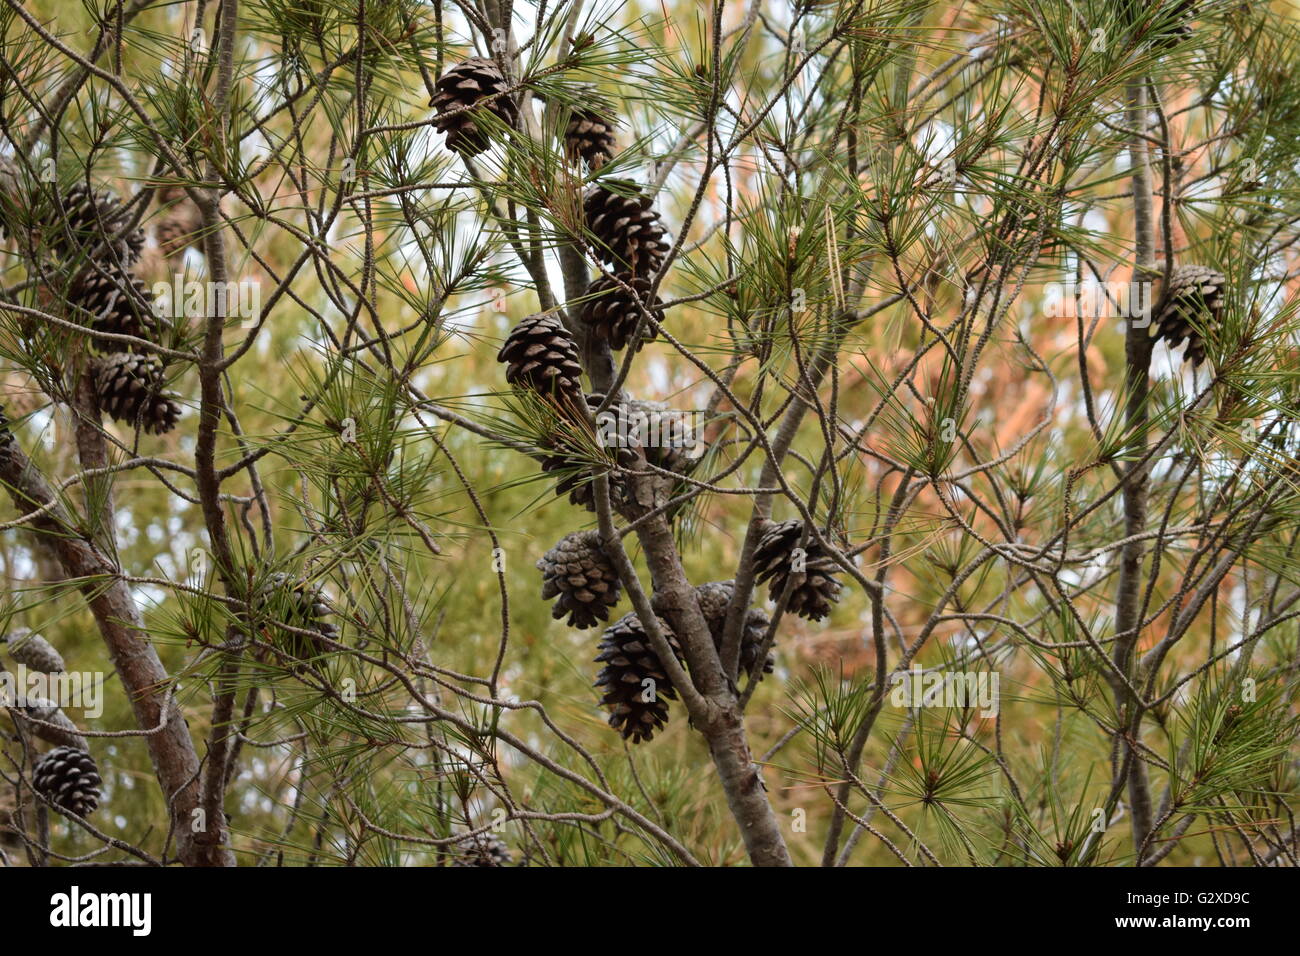 Pine cones on a tree at early evening Stock Photo